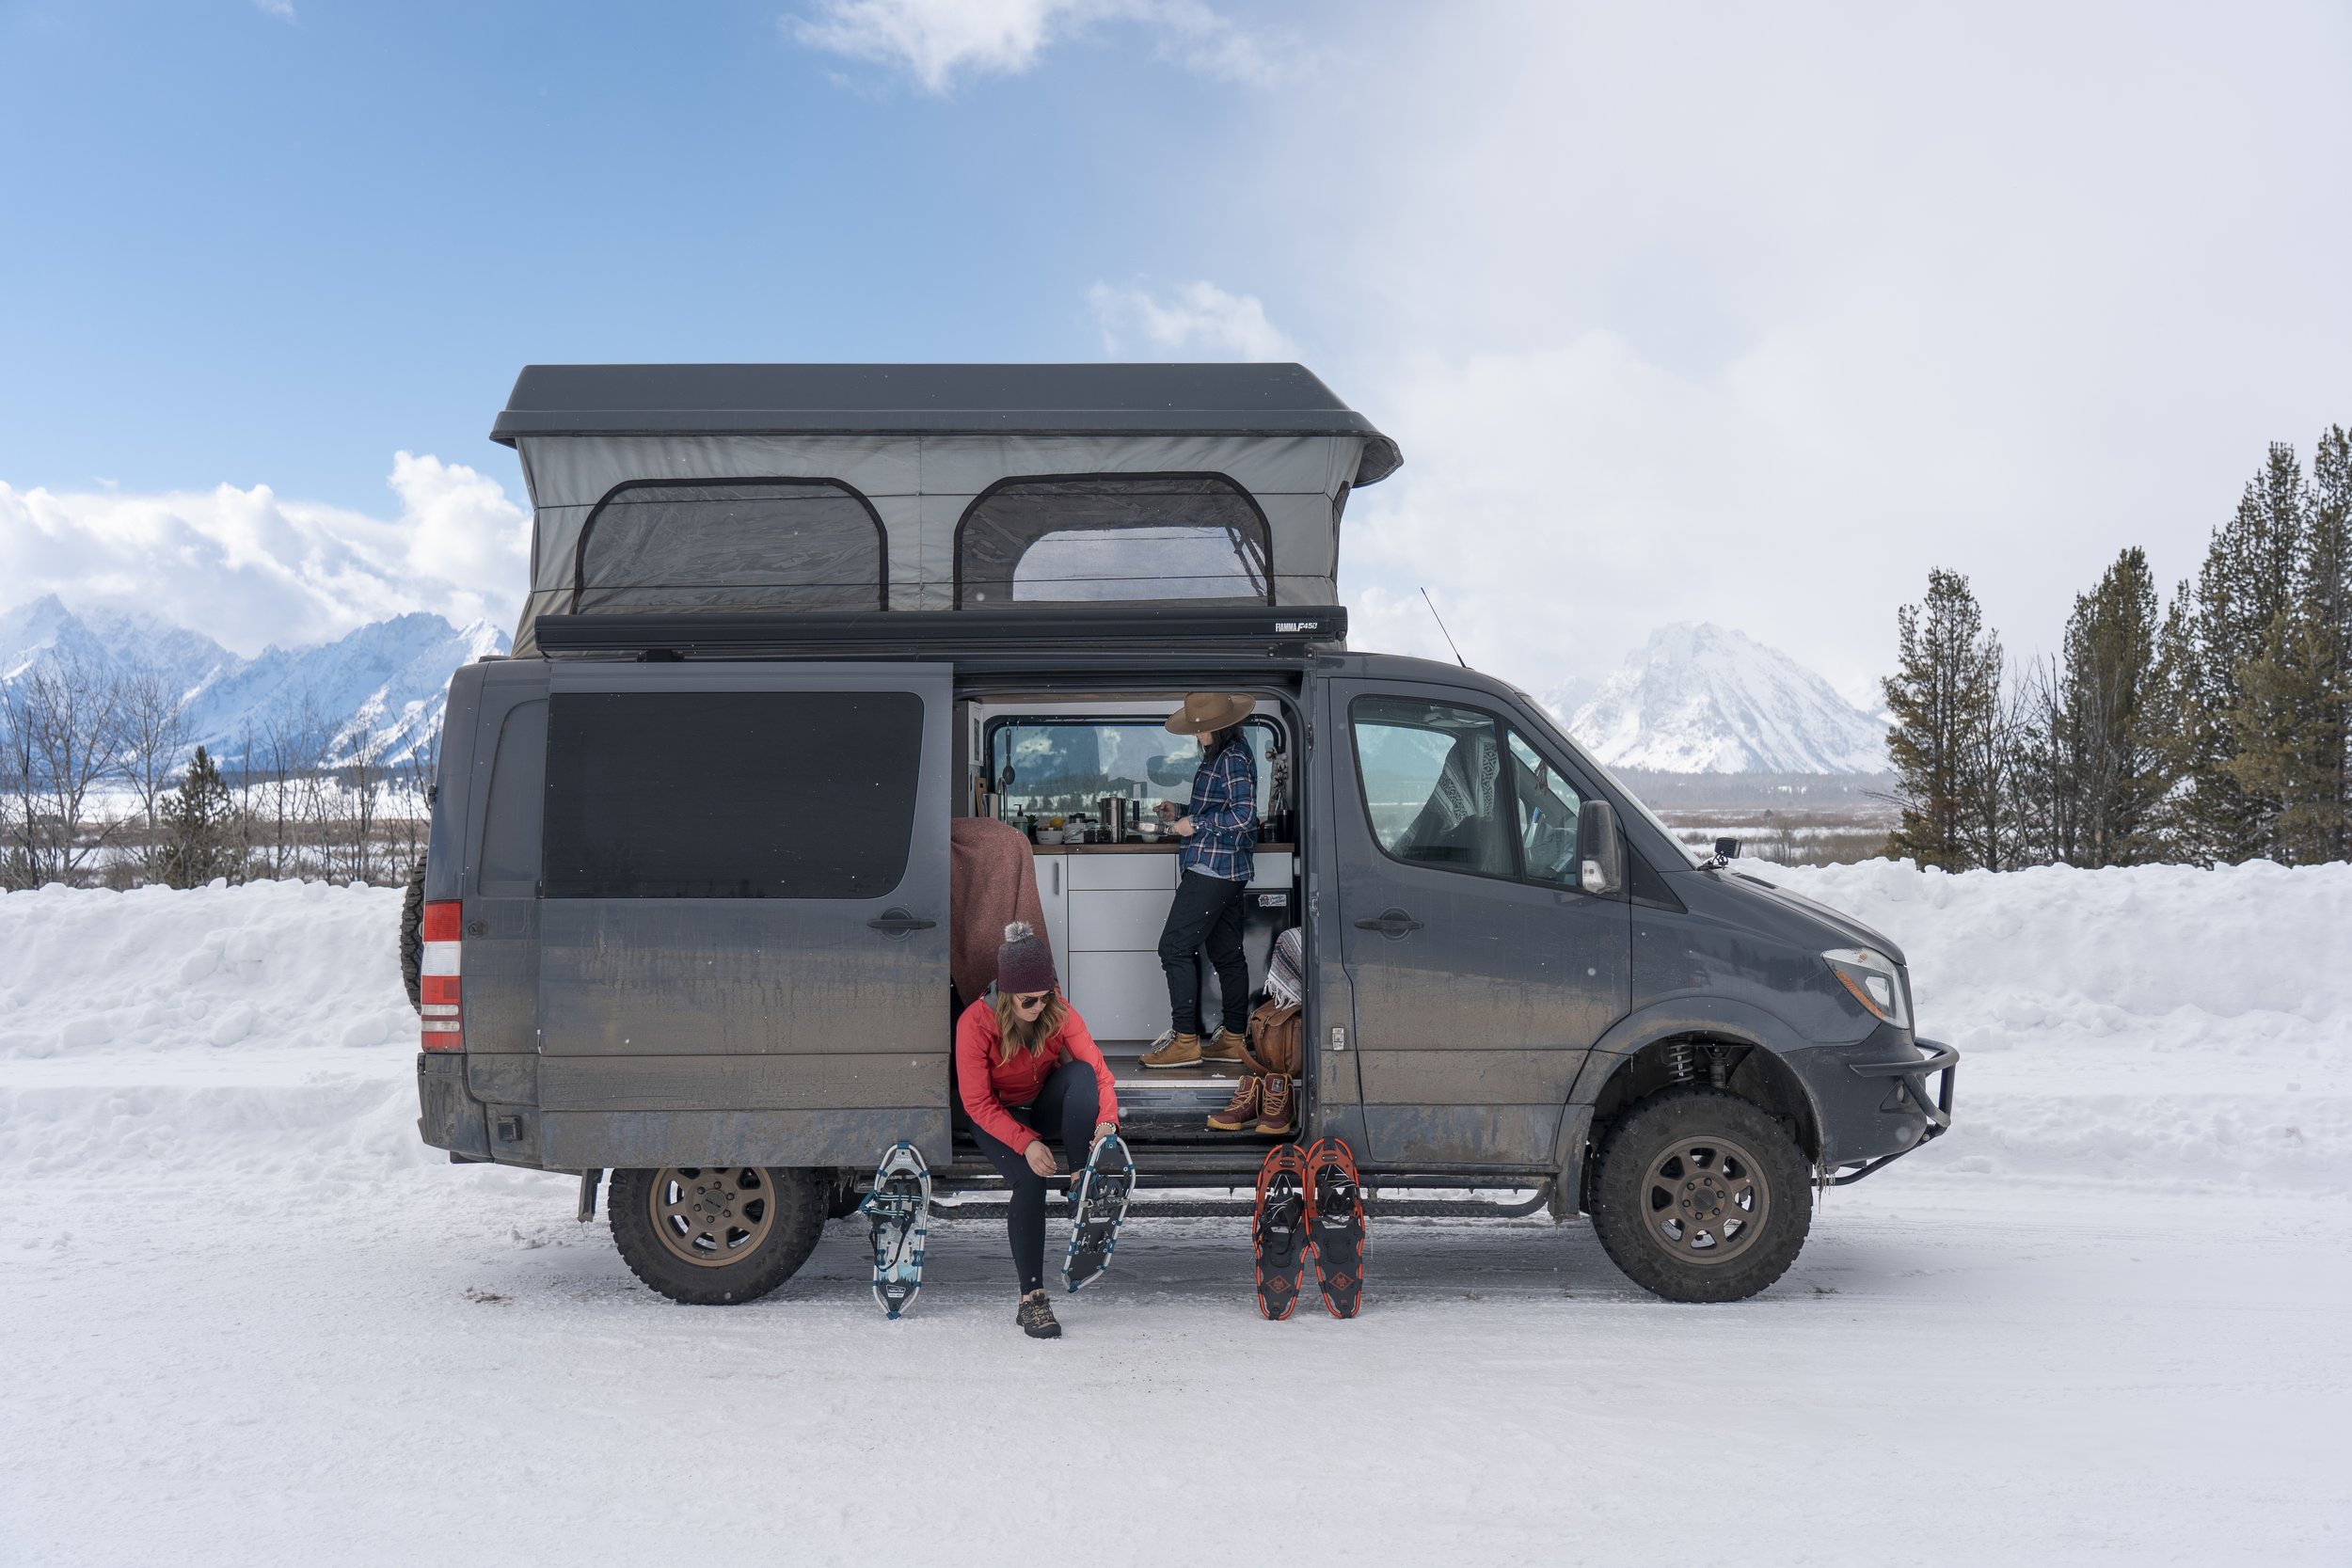 Van Life Pros and Cons